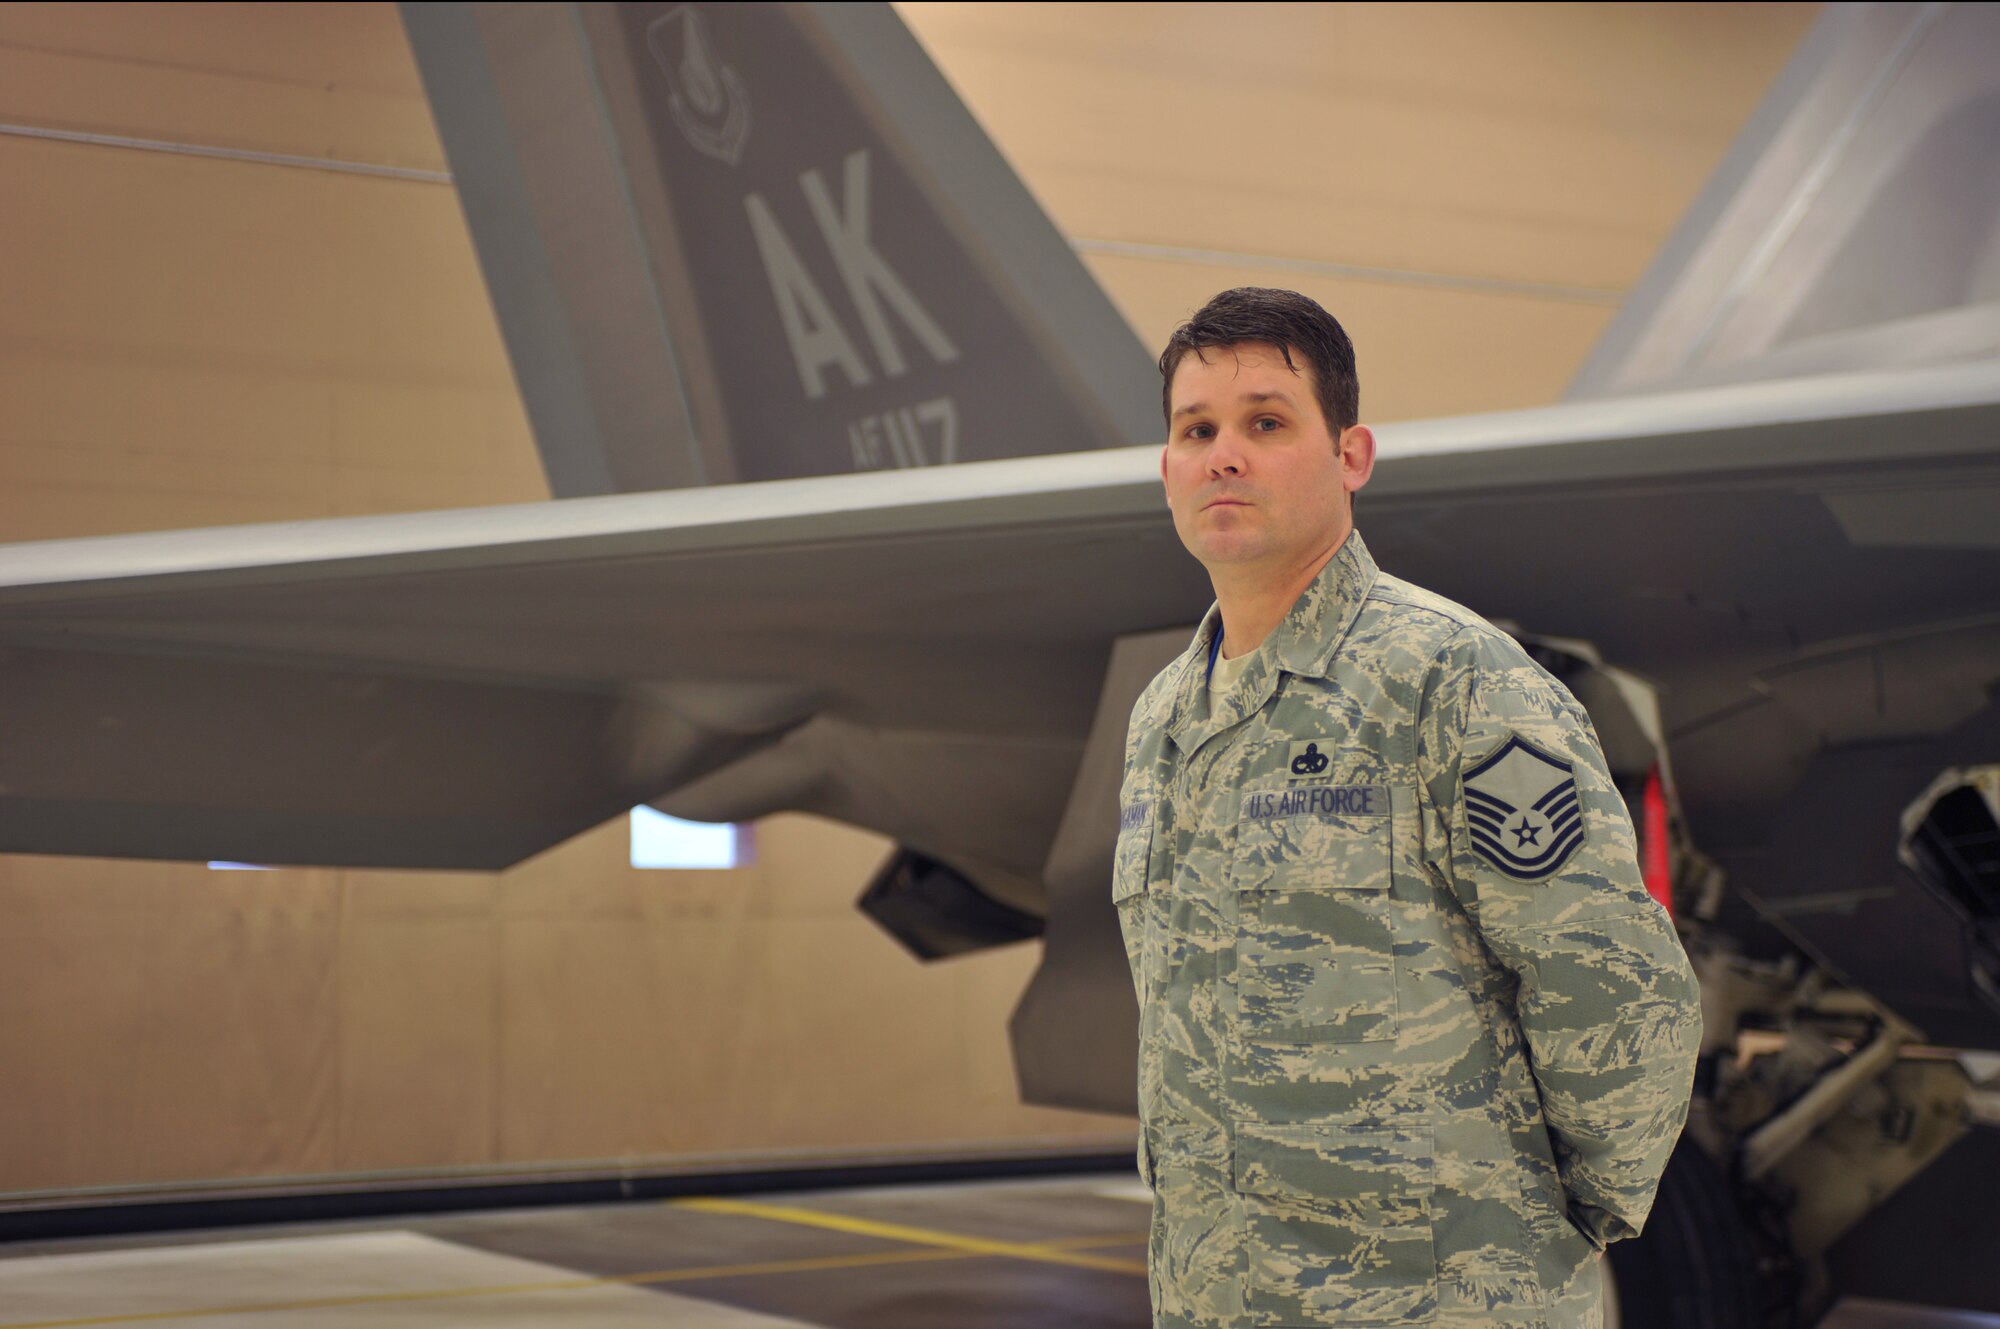 ELMENDORF AIR FORCE BASE, Alaska -- Master Sgt. Scott Waugaman, 477th Aircraft Maintenance Squadron, stands in front of an F-22 Raptor Feb. 12. Waugaman was named the Air Force Reserve Command's 2009 Lieutenant General Leo Marquez Award recipient technician supervisor. This award is presented to maintainers who have demonstrated the highest degree of sustained job performance, job knowledge, job efficiency and results in the categories of aircraft, munitions and missile, and communications-electronics maintenance. (Air Force photo by Senior Airman David Carbajal)